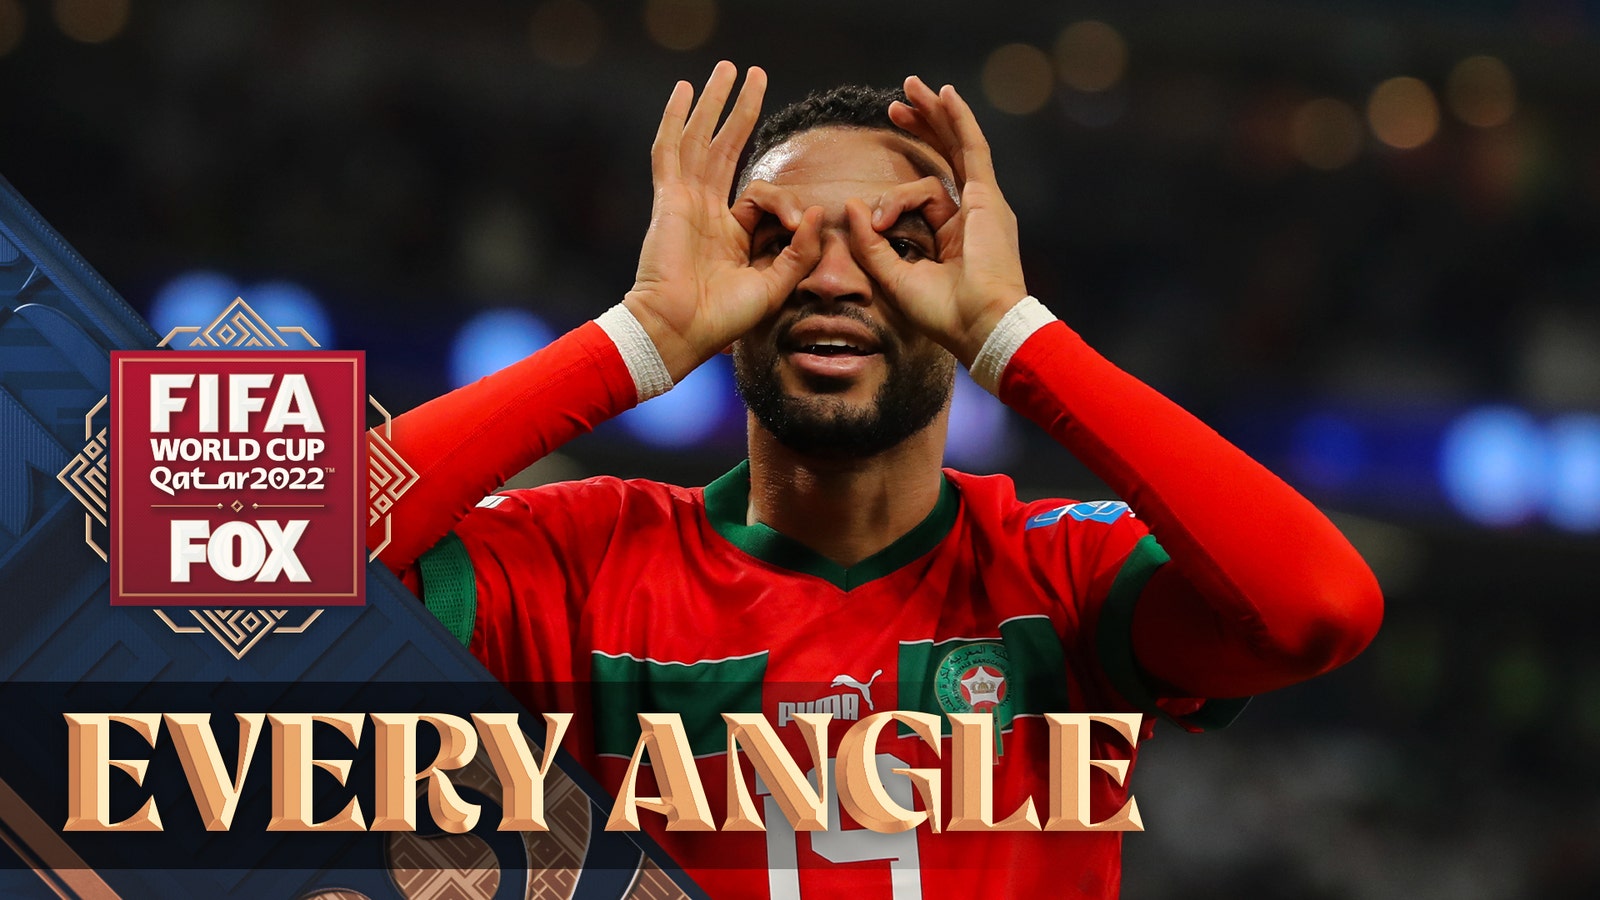 Youssef N-Nessiri's hilarious header for Morocco at the 2022 FIFA World Cup |  every angle